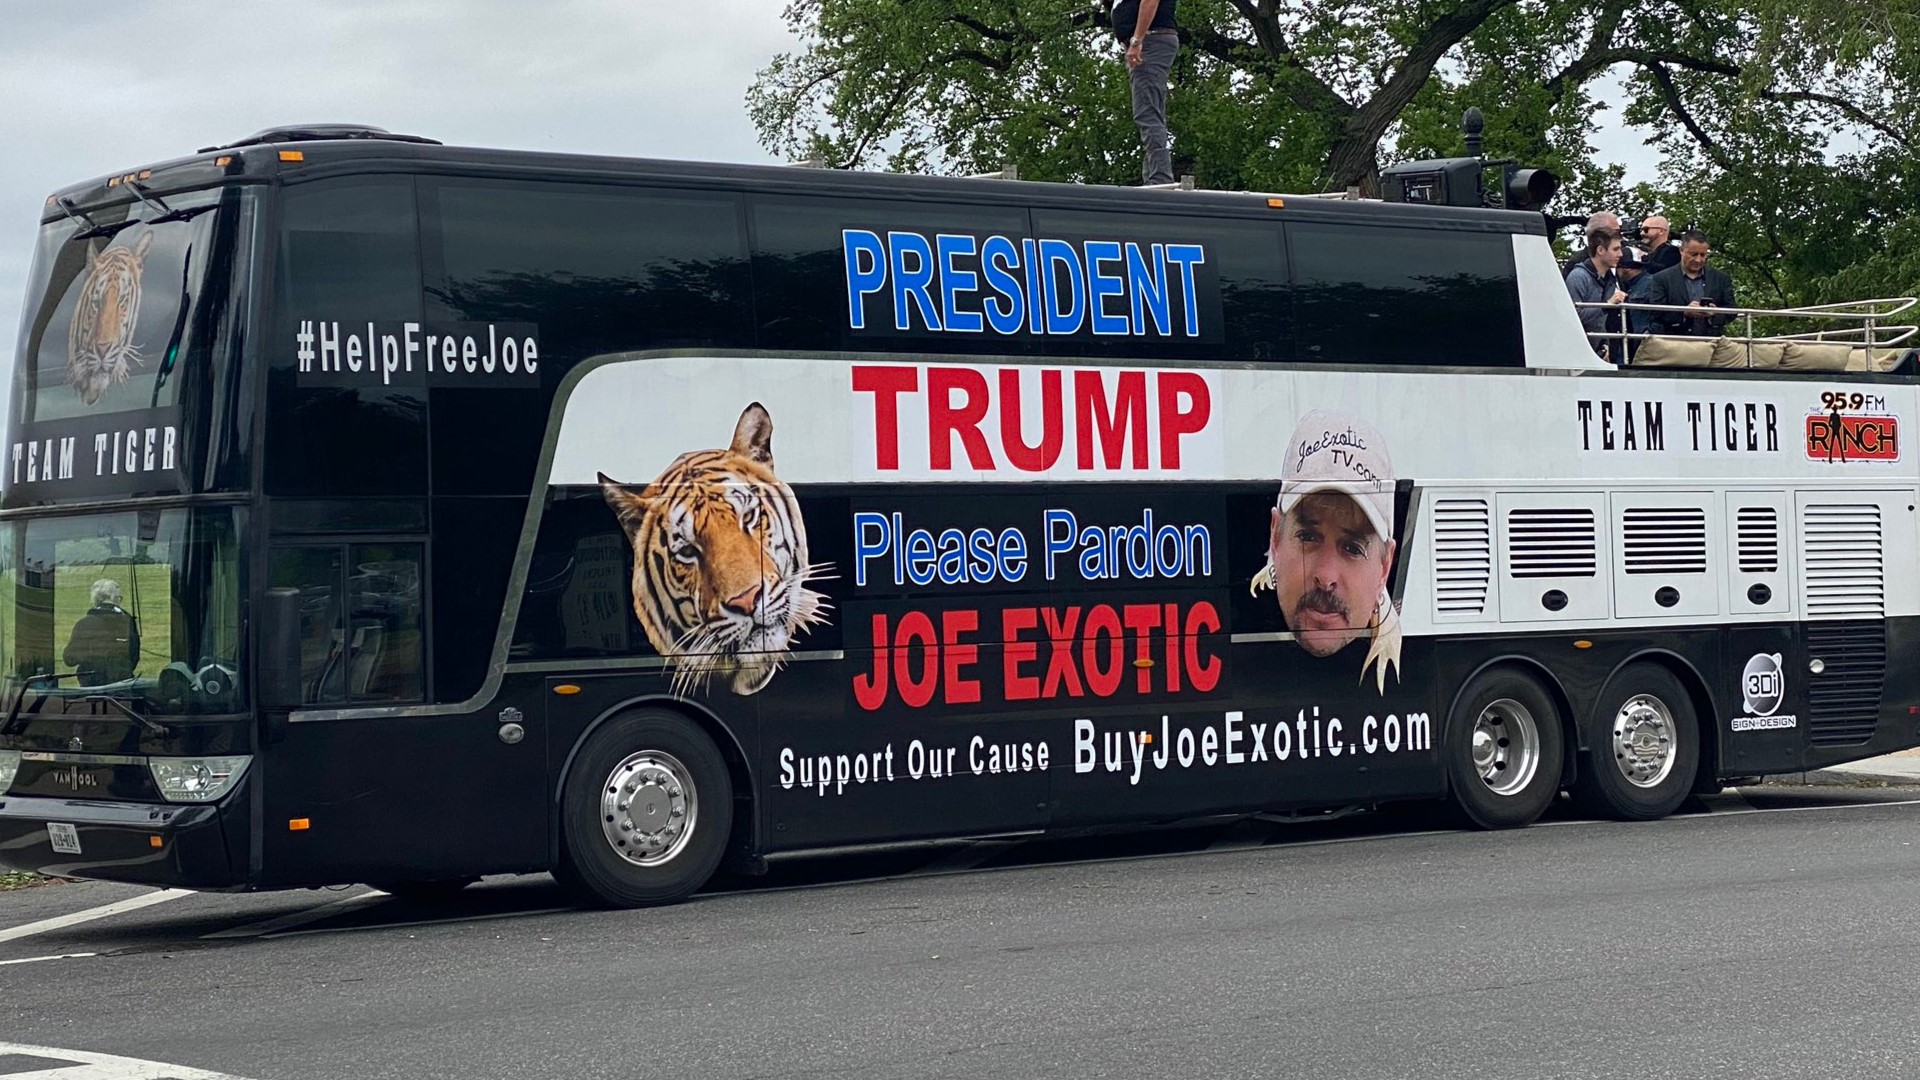 The legal team of Neflix's Tiger King star, Joe Exotic, visited Trump's hotel in Washington, D.C. in hopes of getting Joe a presidential pardon from President Trump.